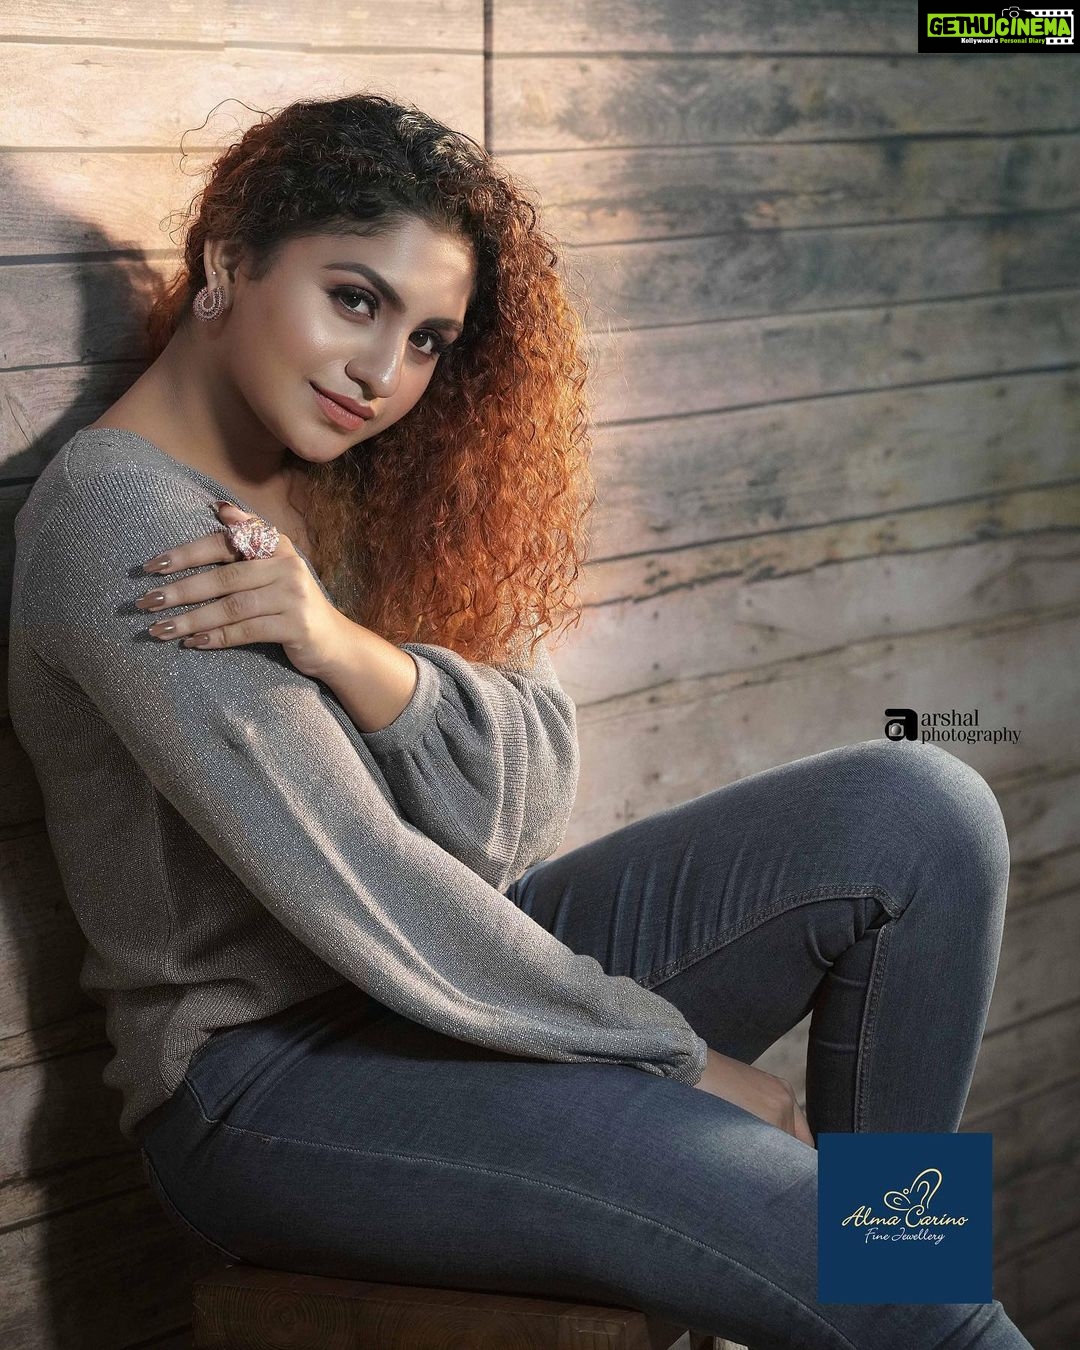 Noorin Shereef Nude Picture - Actress Noorin Shereef HD Photos and Wallpapers February 2021 - Gethu Cinema